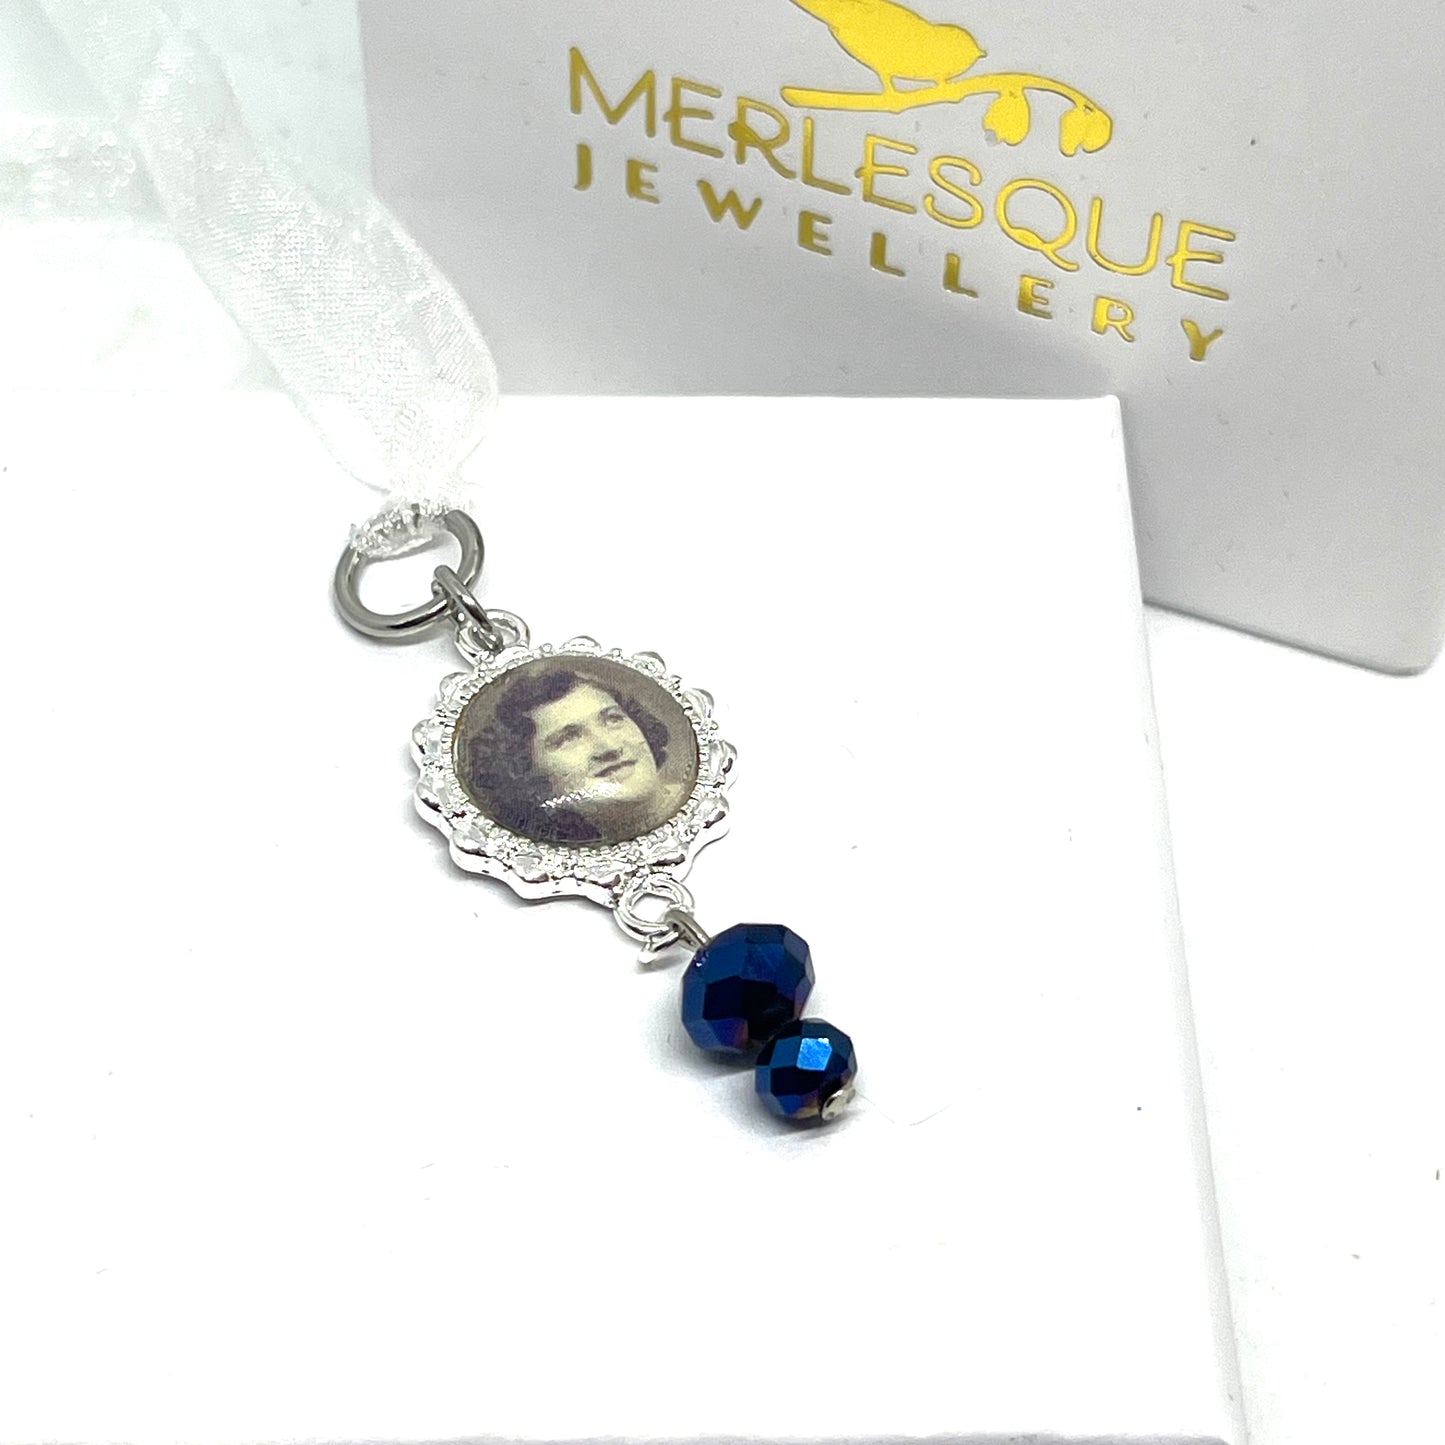 Silver seting with a photo set in it with blue glass beads.